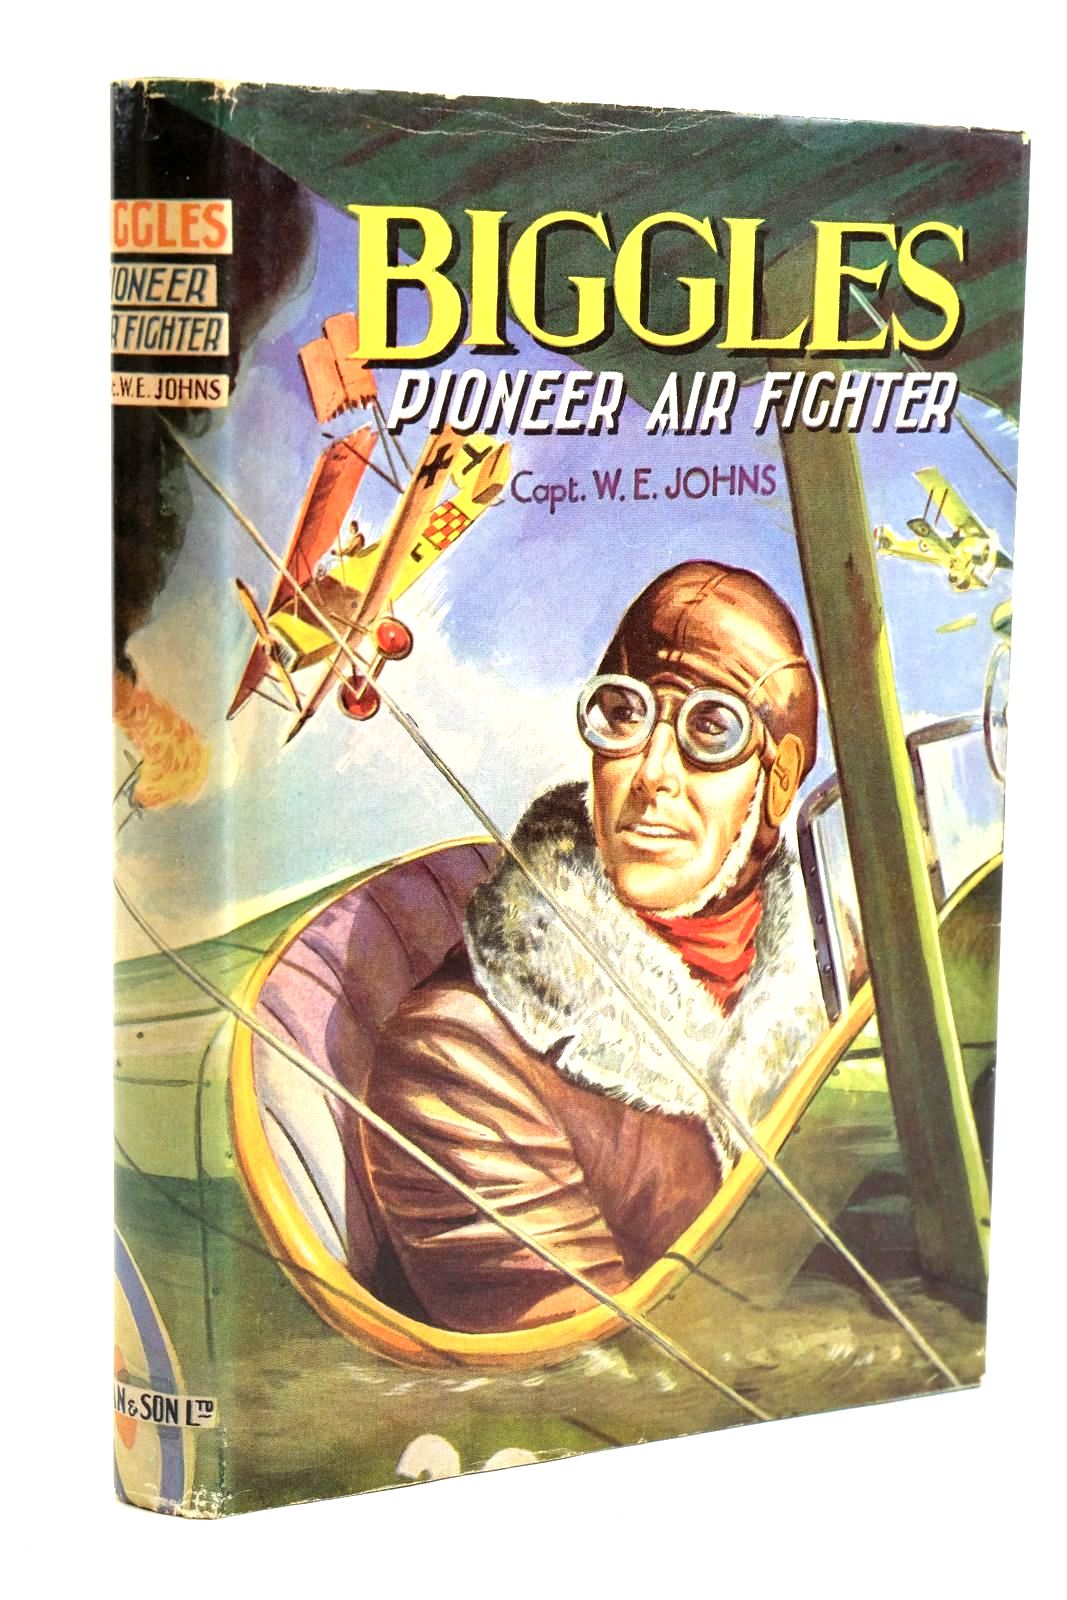 Photo of BIGGLES PIONEER AIR FIGHTER written by Johns, W.E. published by Dean & Son Ltd. (STOCK CODE: 1320703)  for sale by Stella & Rose's Books